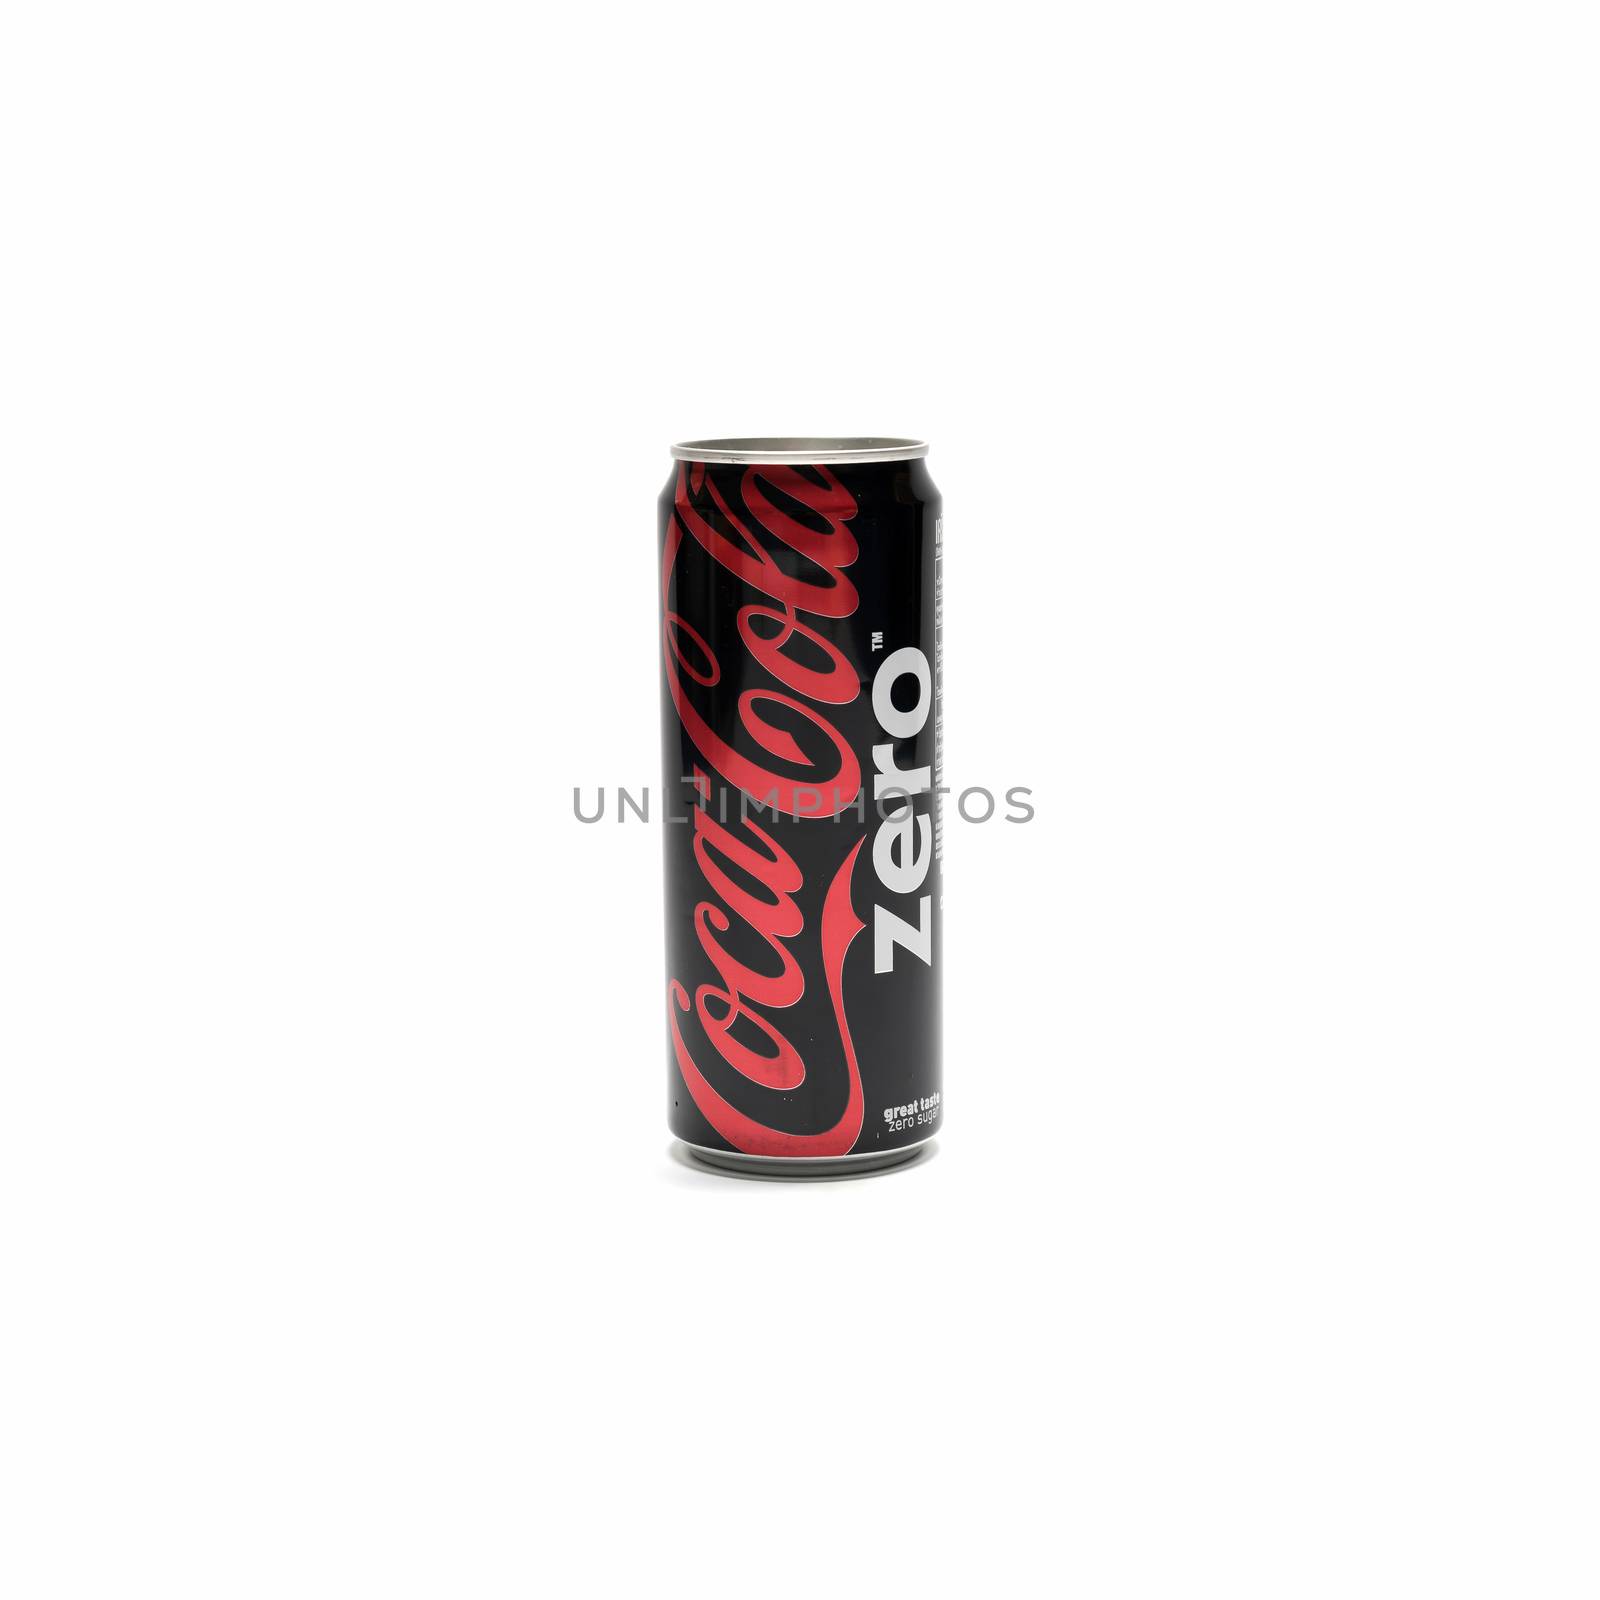 BANGKOK, THAILAND - JUNE 24, 2015: The new thin Coca-Cola zero can on white background in bangkok thailand on 24 June 2015